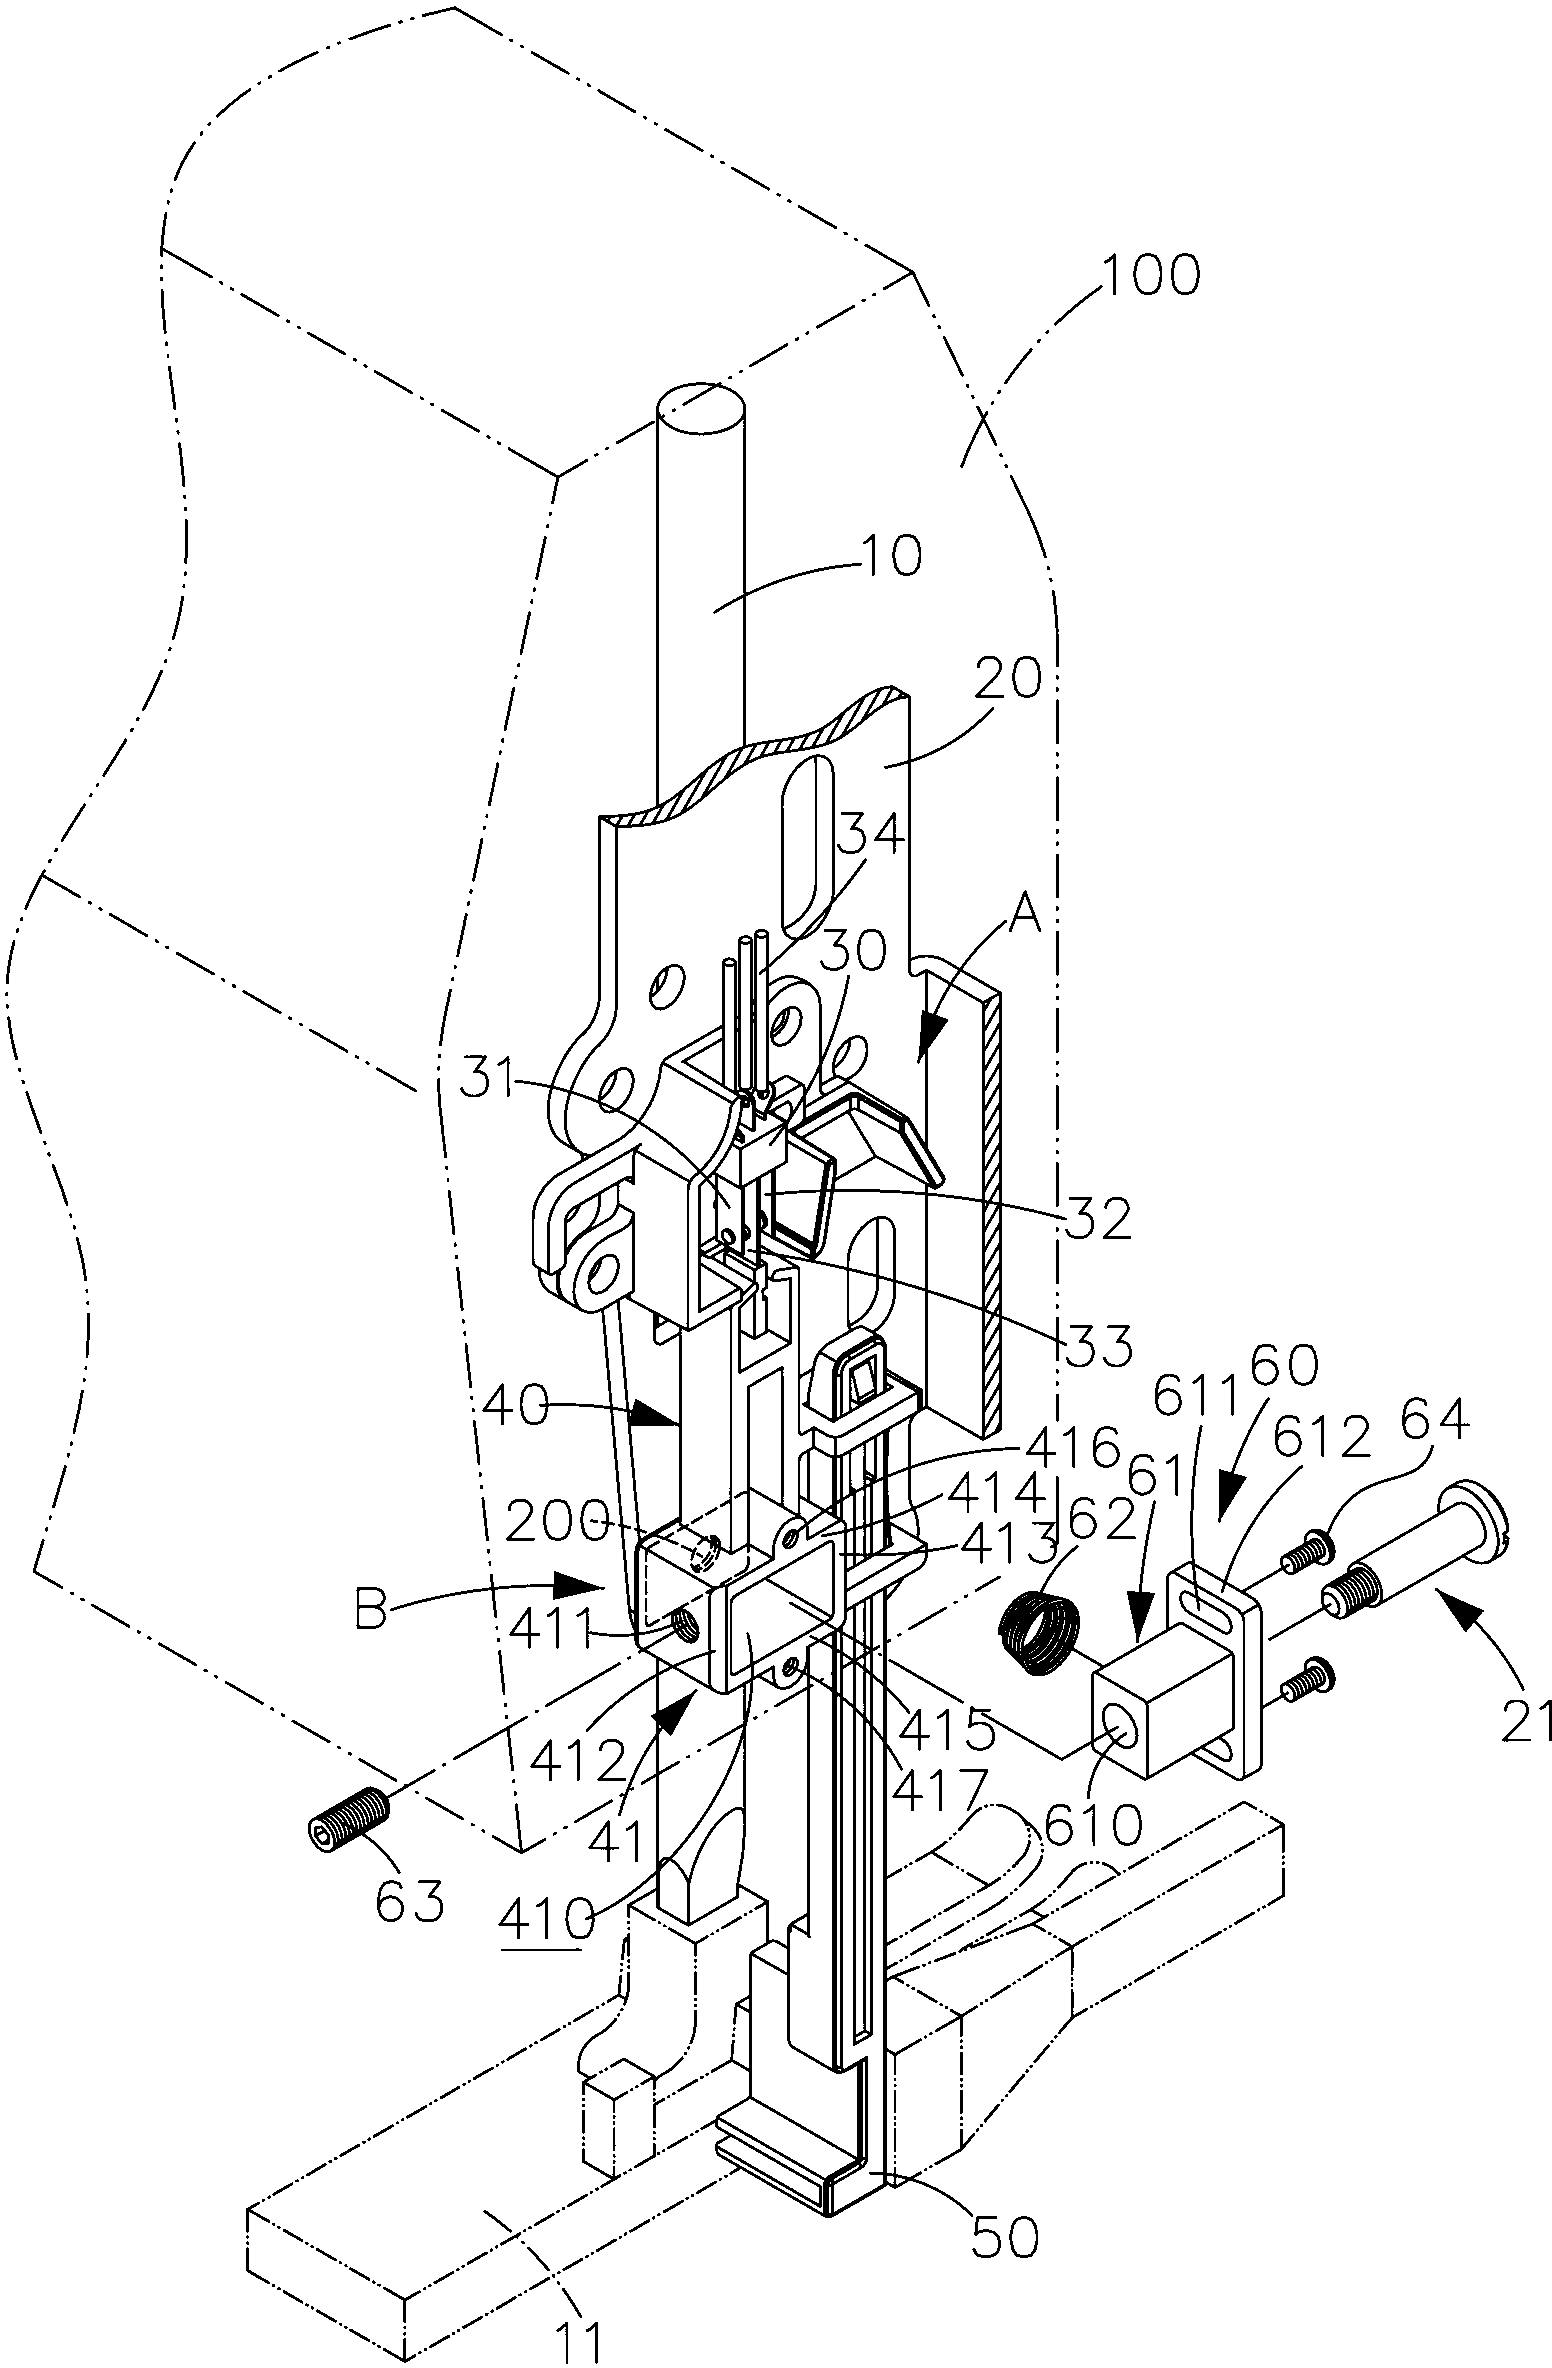 Regulation structure of swing arm and swing center for controlling stroke of sewing machine